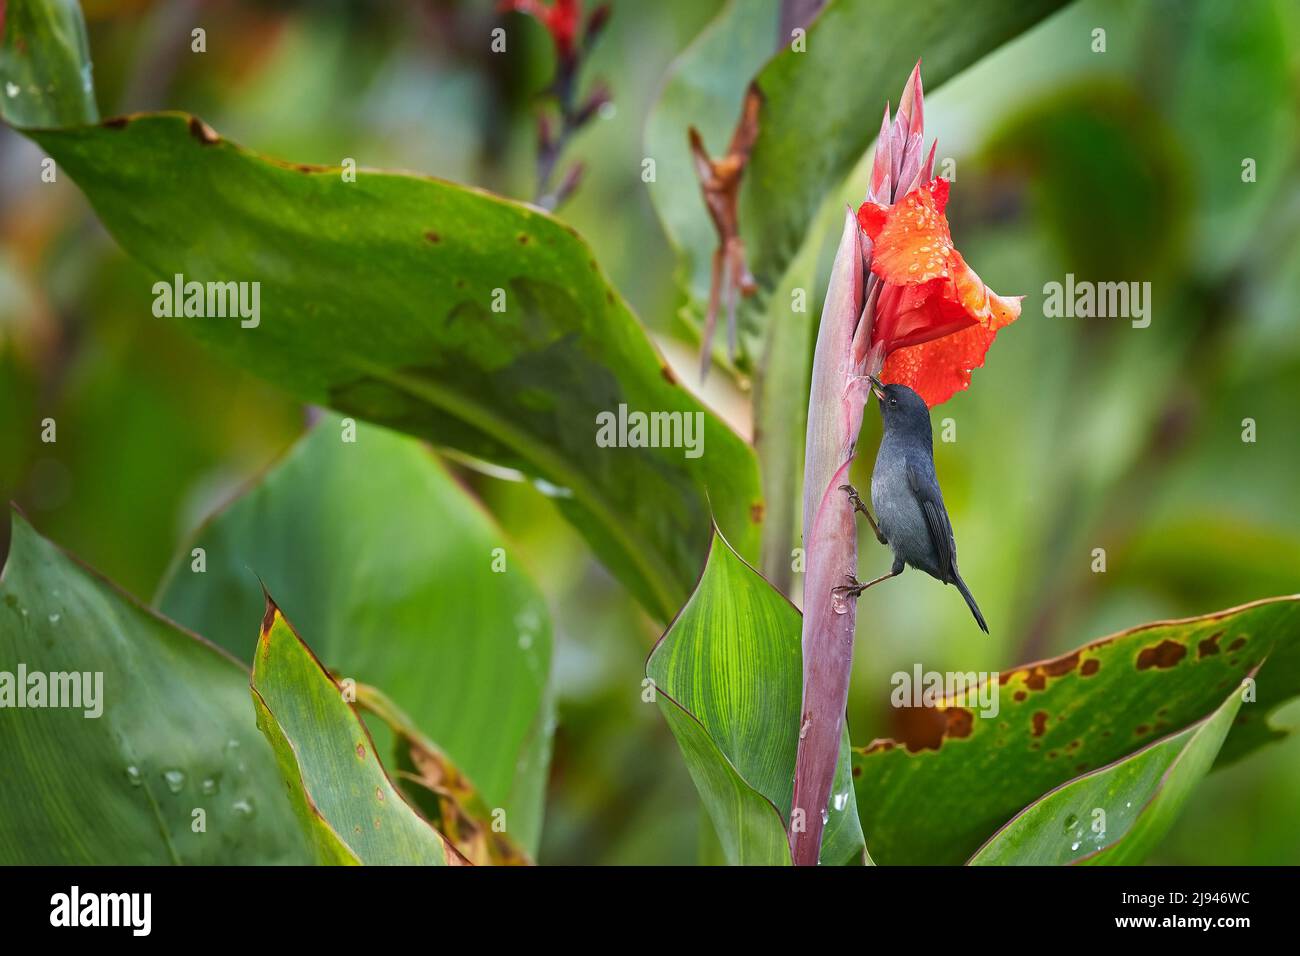 Glossy Flowerpiercer, Diglossa lafresnayii, black bird with curved bill sittin on the orange flower. Exotic animal from Costa Rica. Bird with red flow Stock Photo